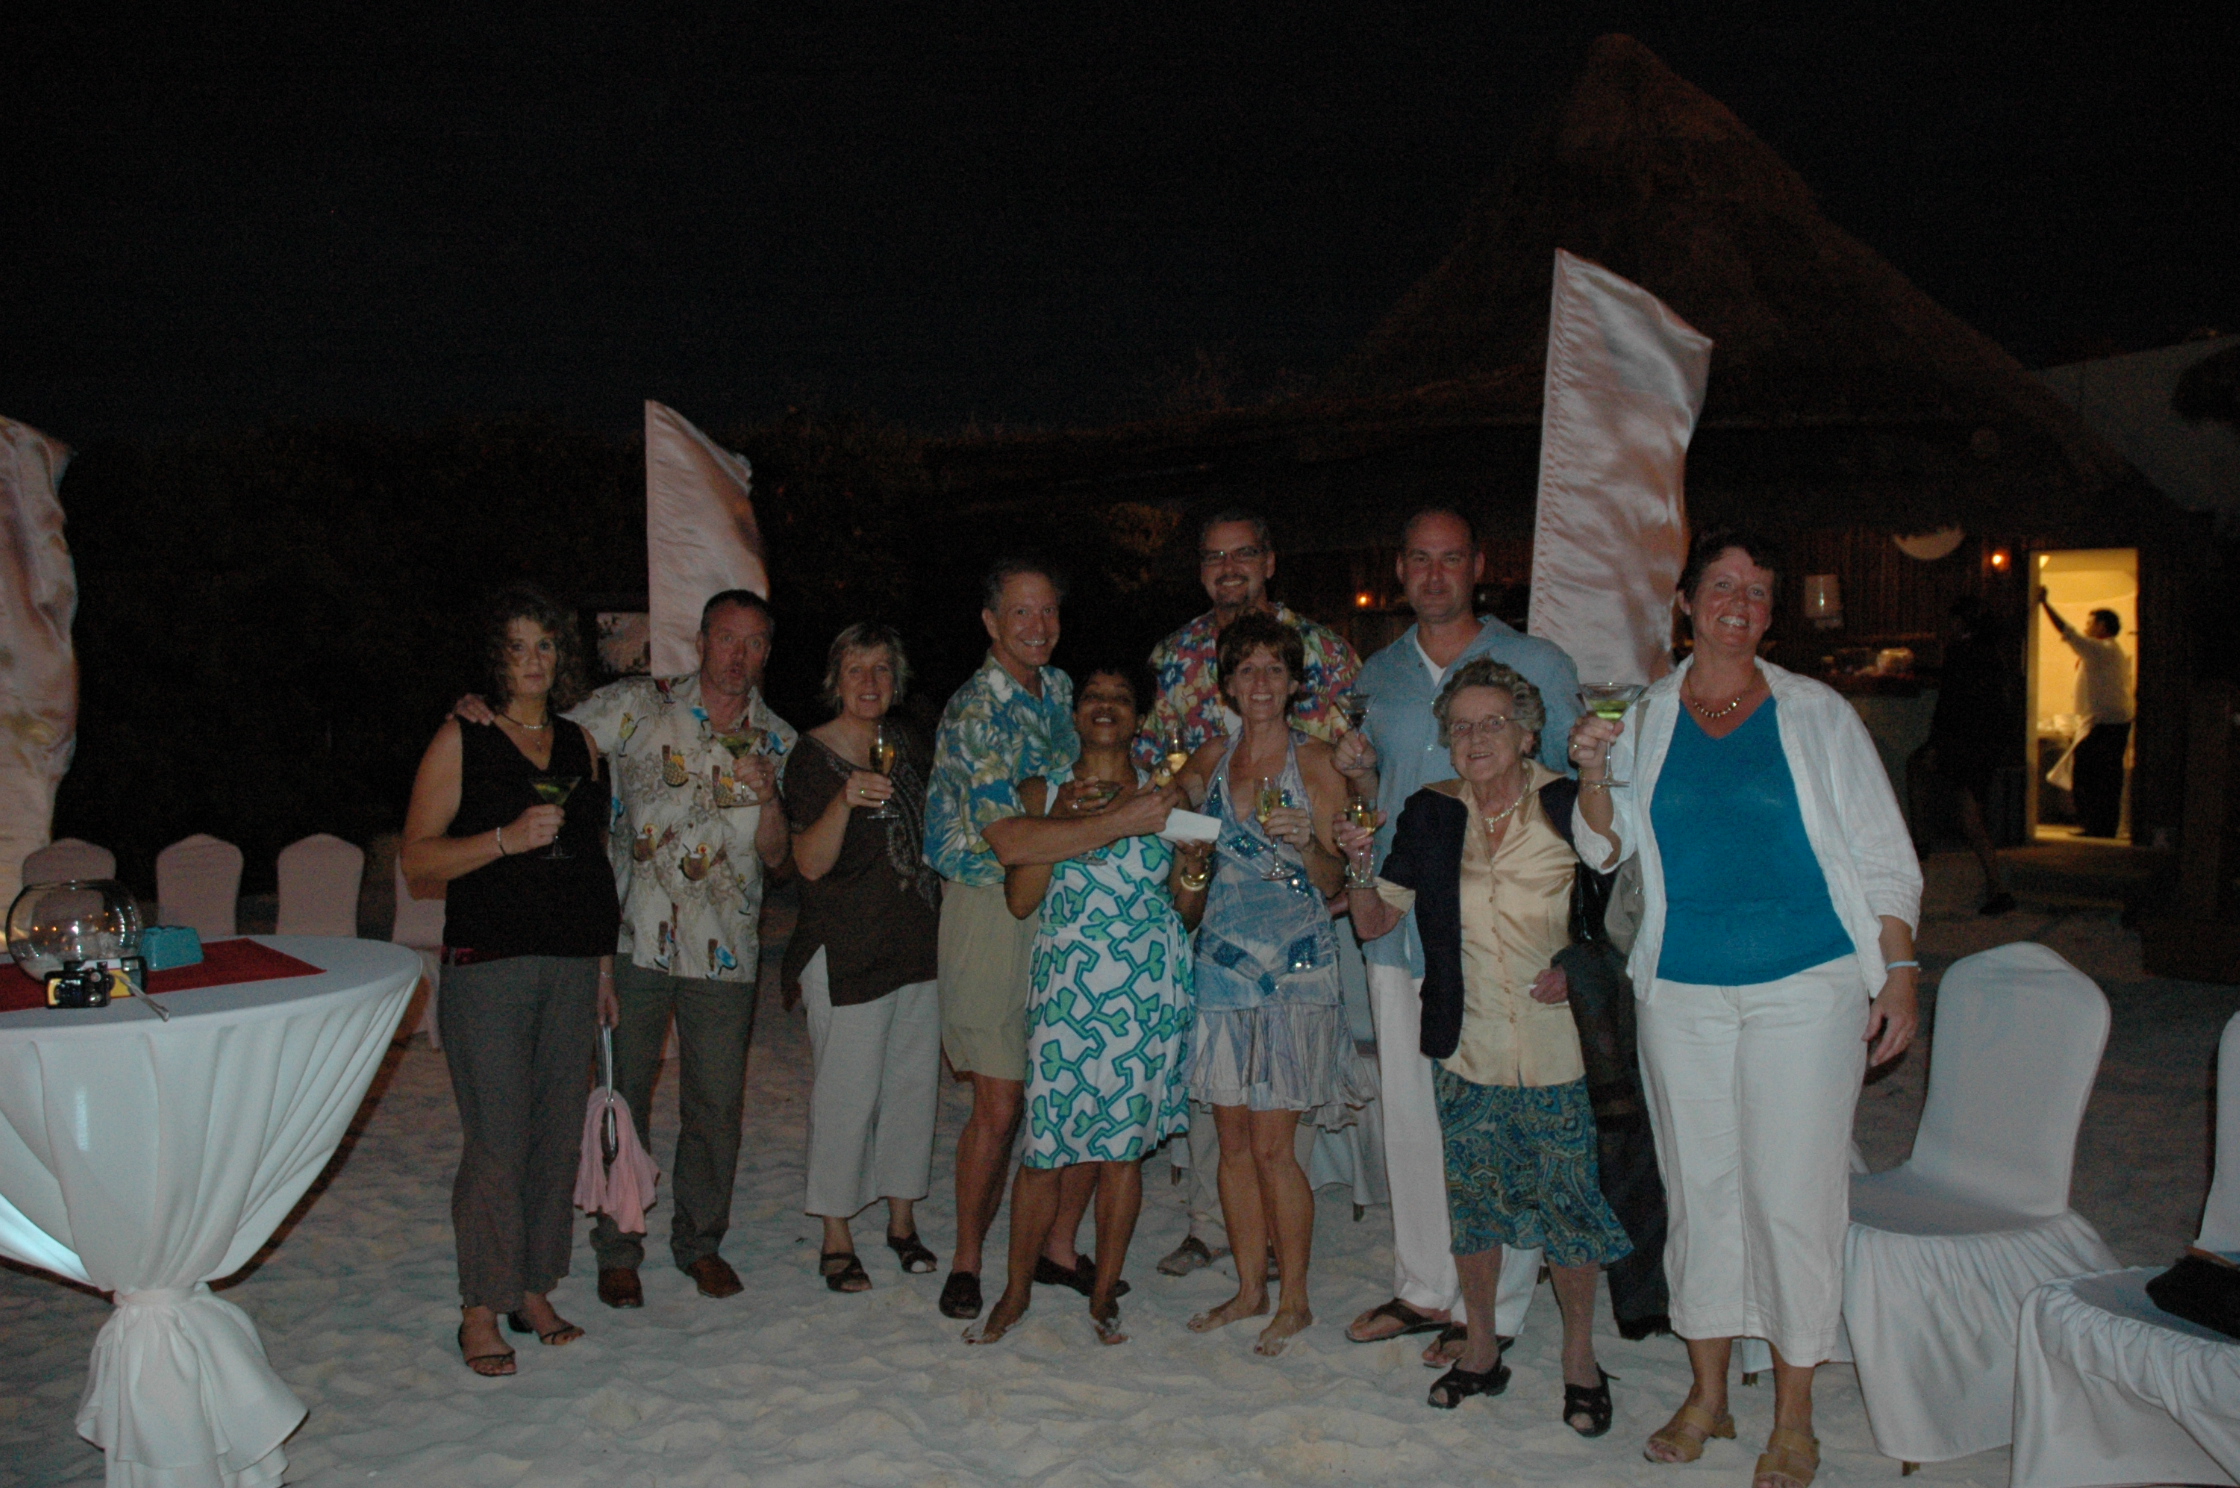 Everyone was in the party-mood -- but when in Cancun, how could it be any other way!